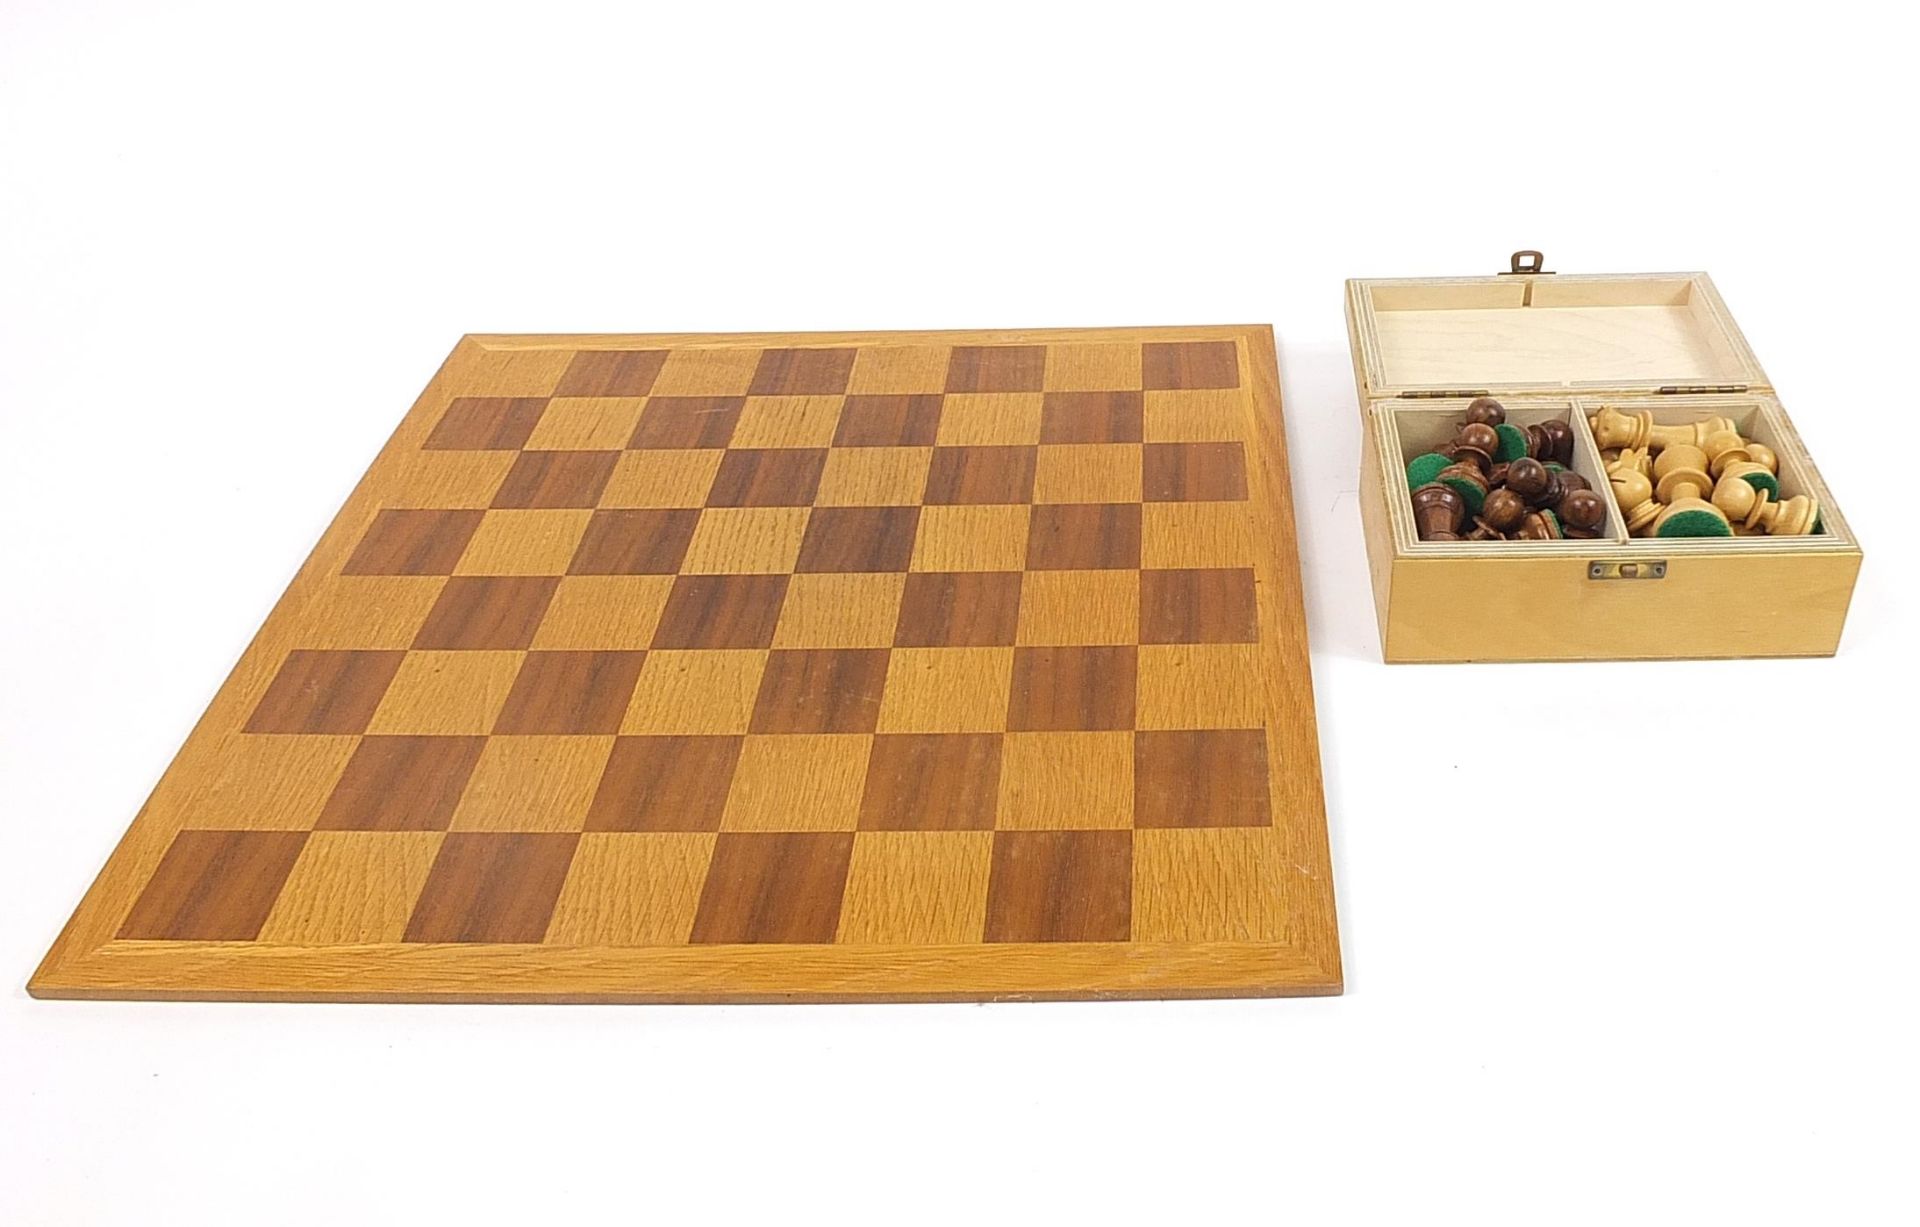 Staunton turned wood chess set with board, the largest pieces 7.5cm high, the board 44.5cm x 44.5cm - Image 3 of 3